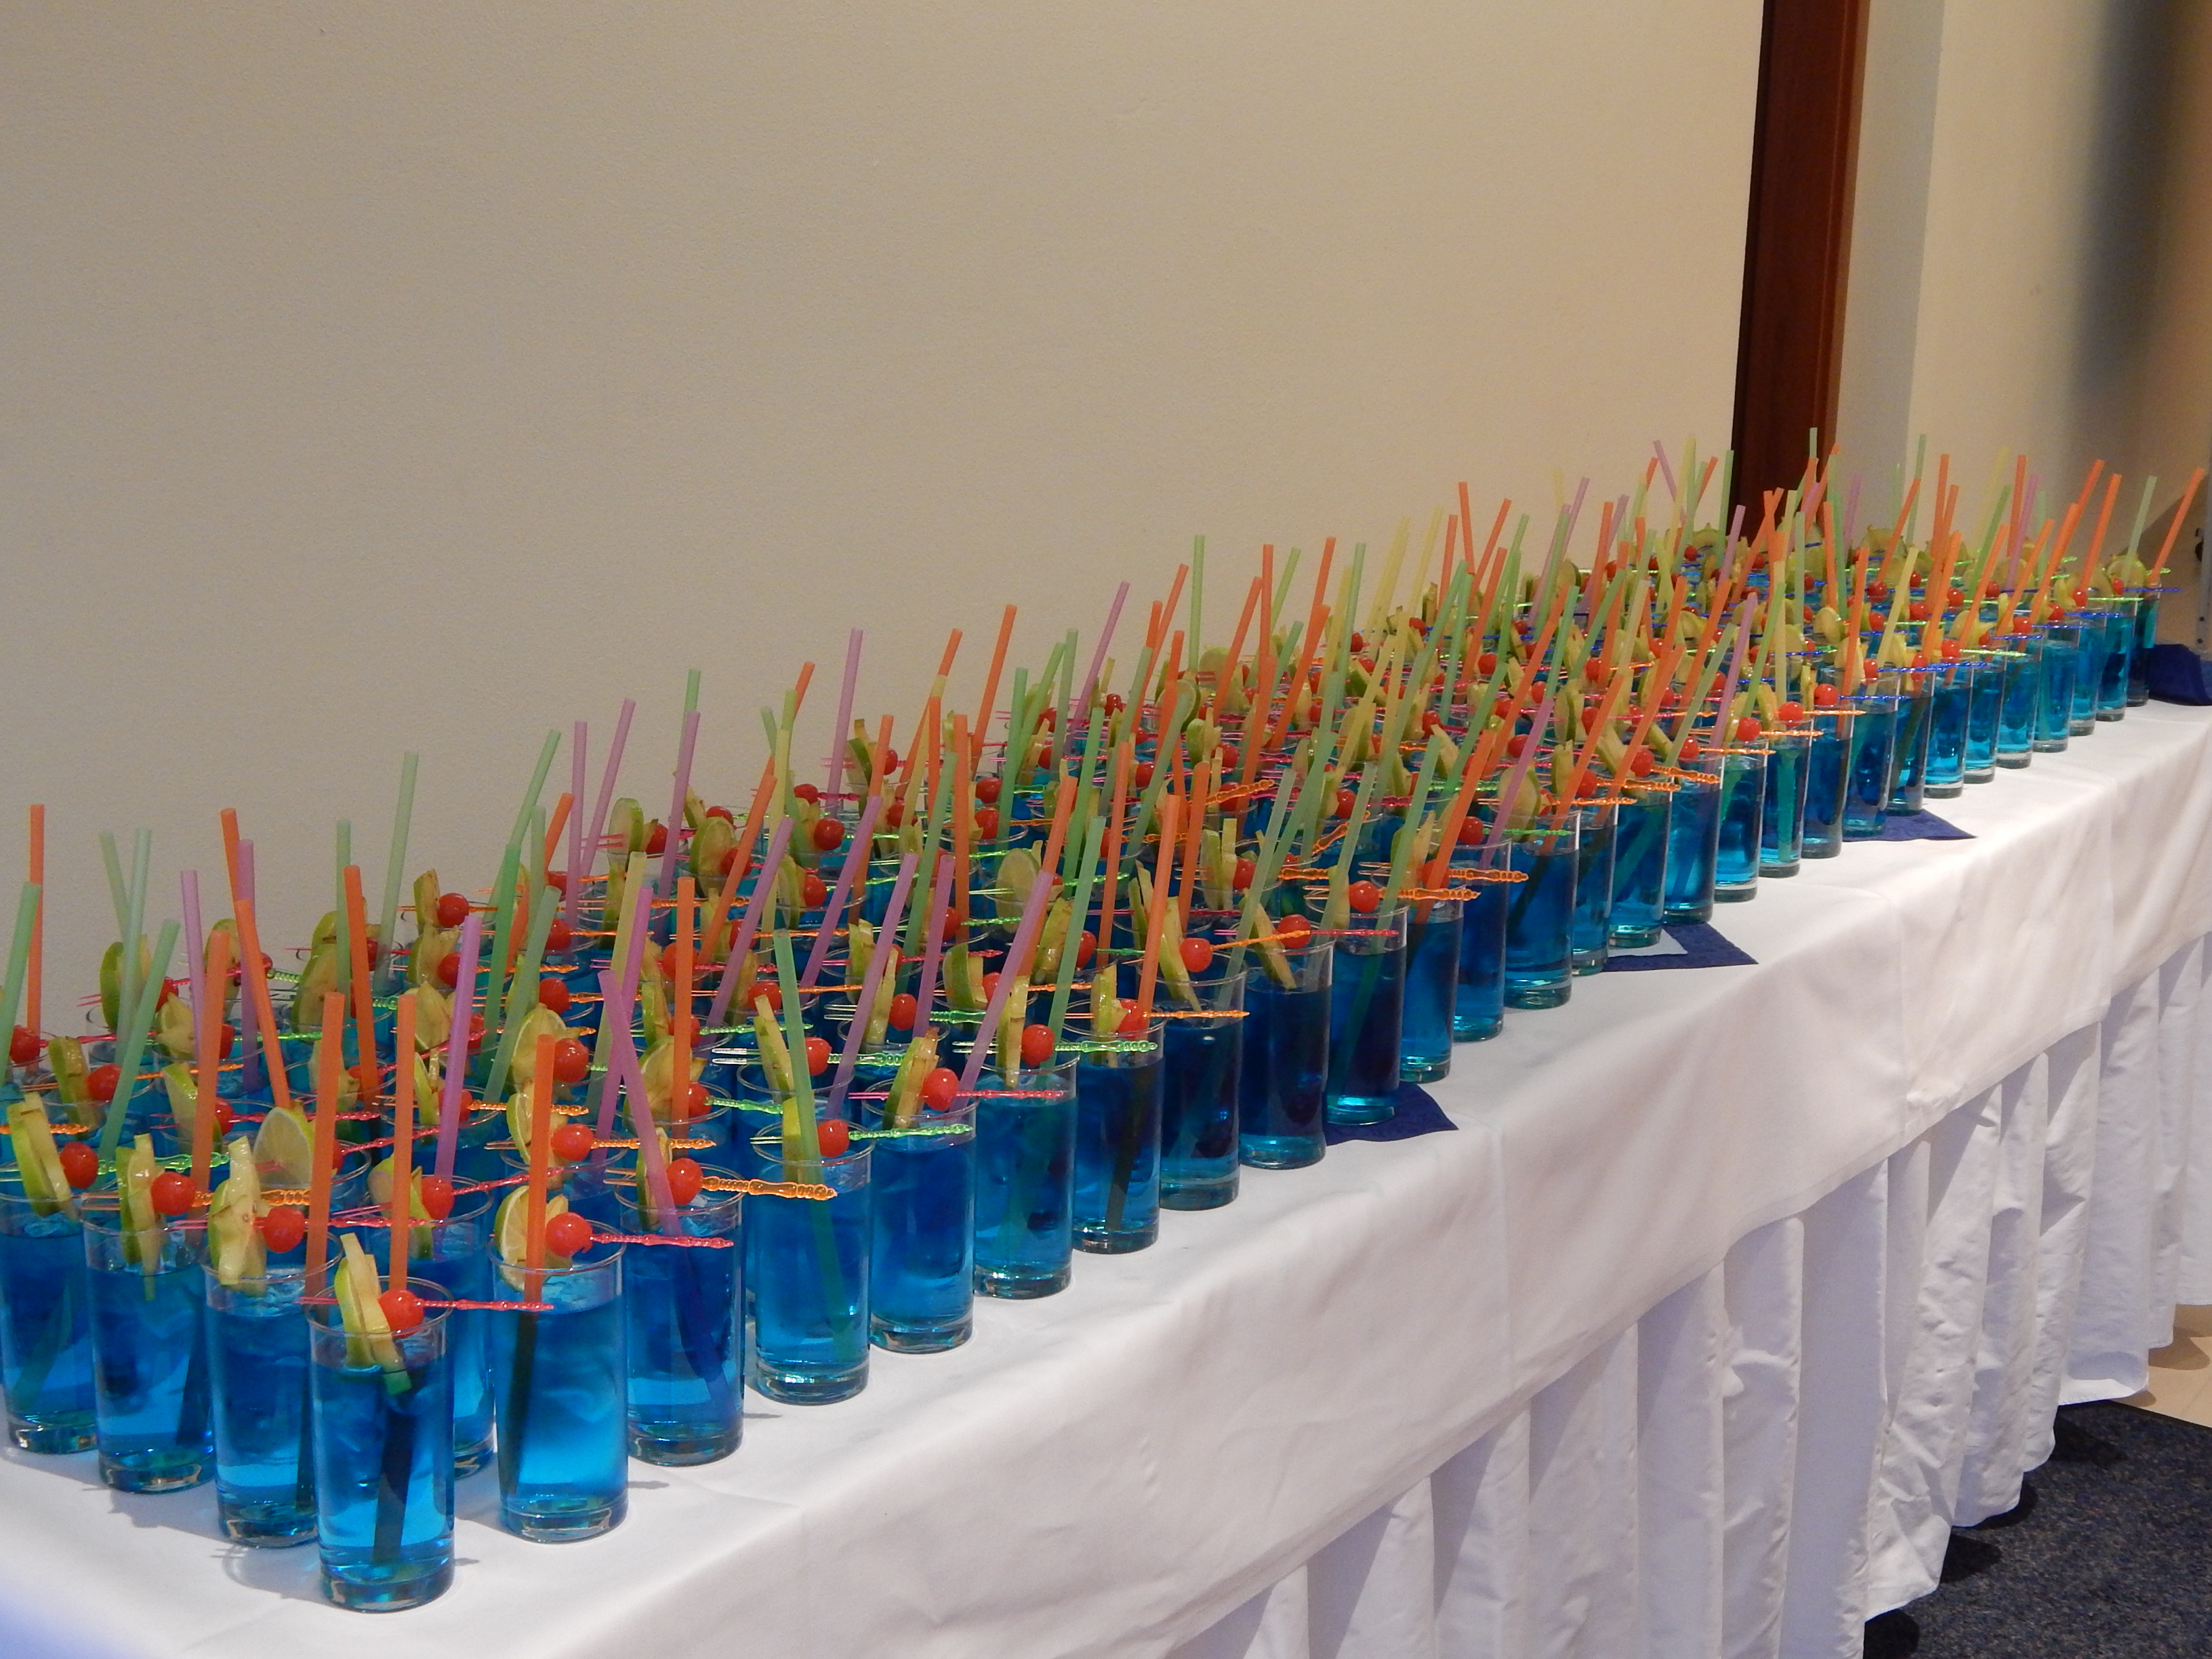 27 drinks for ceremony in ACES blue